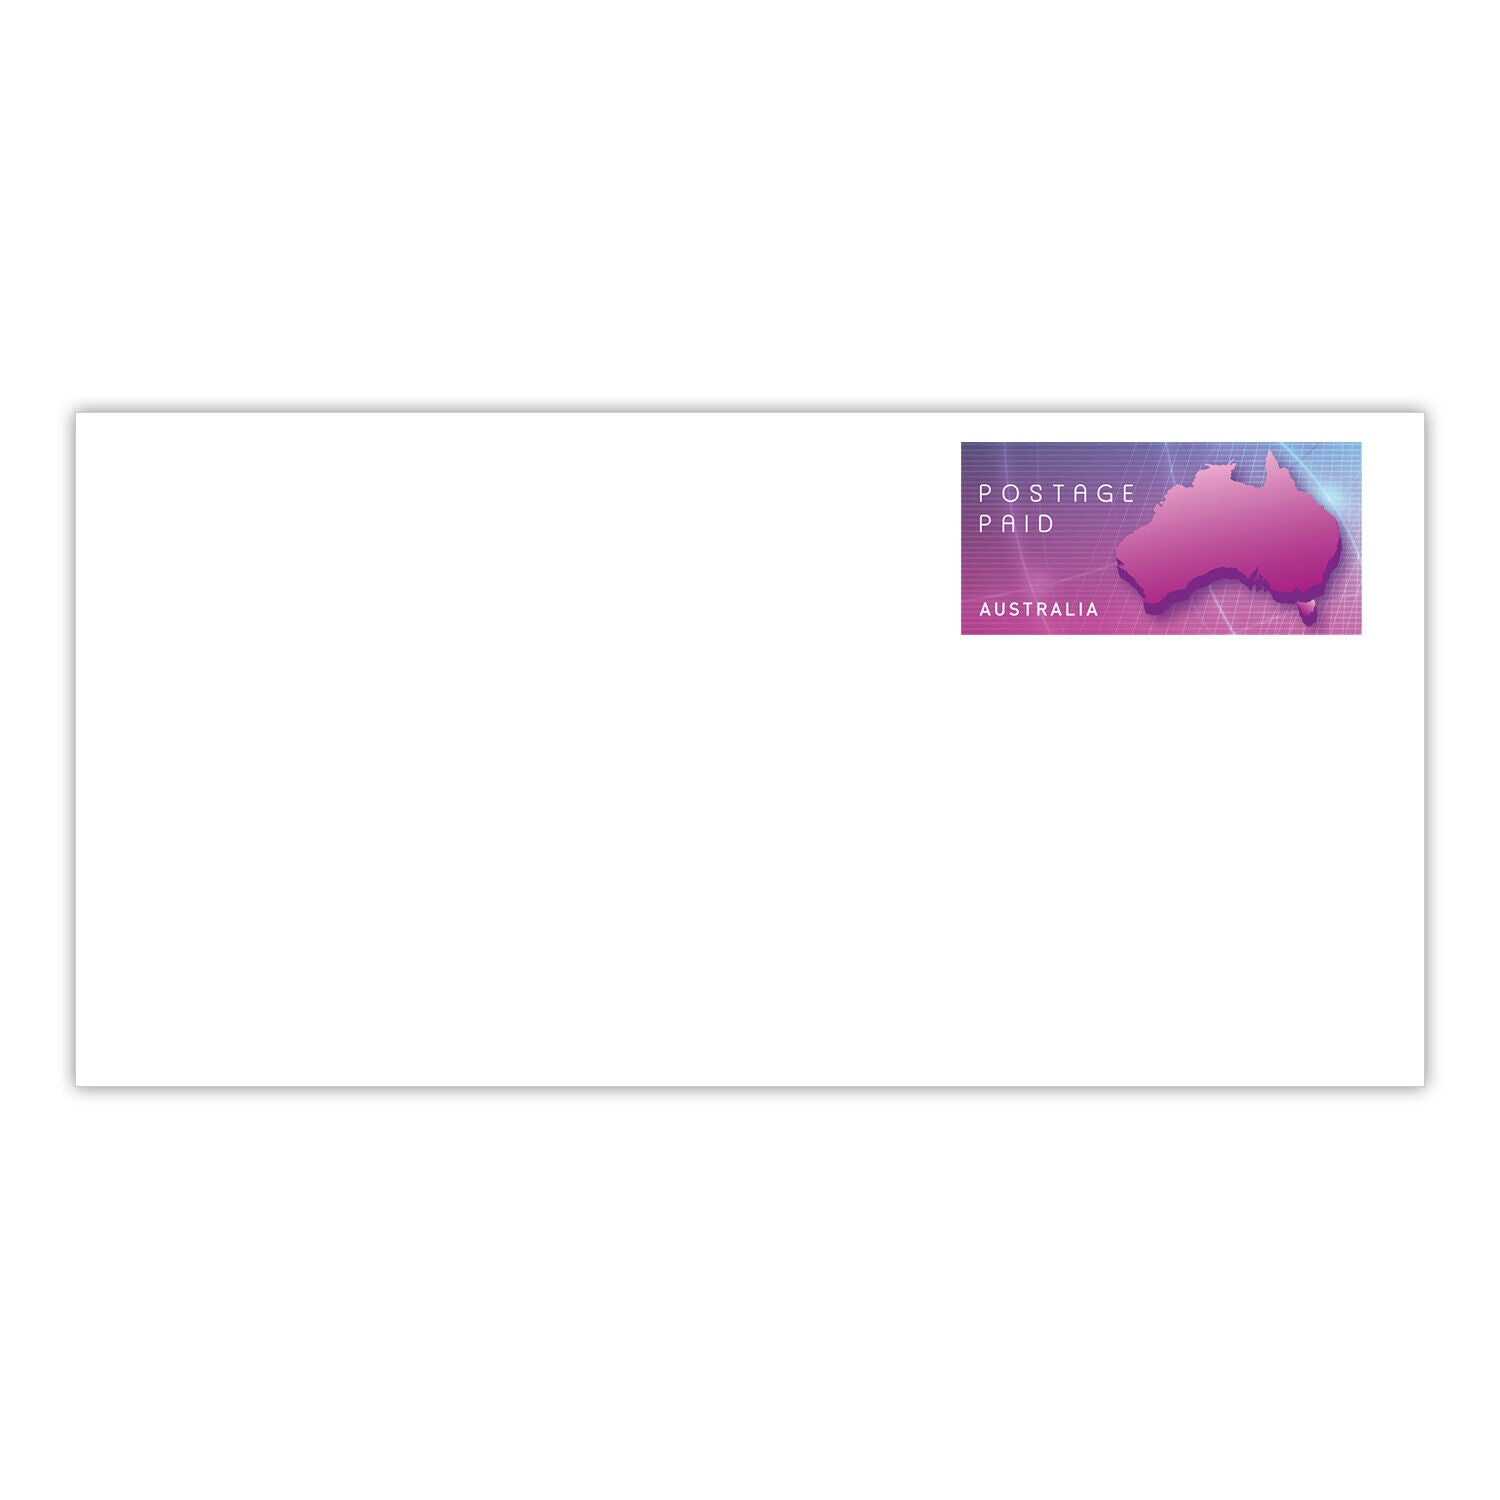 Australia Post Small DL Prepaid Envelope up to 250g – 1000 Pack RRP $1410